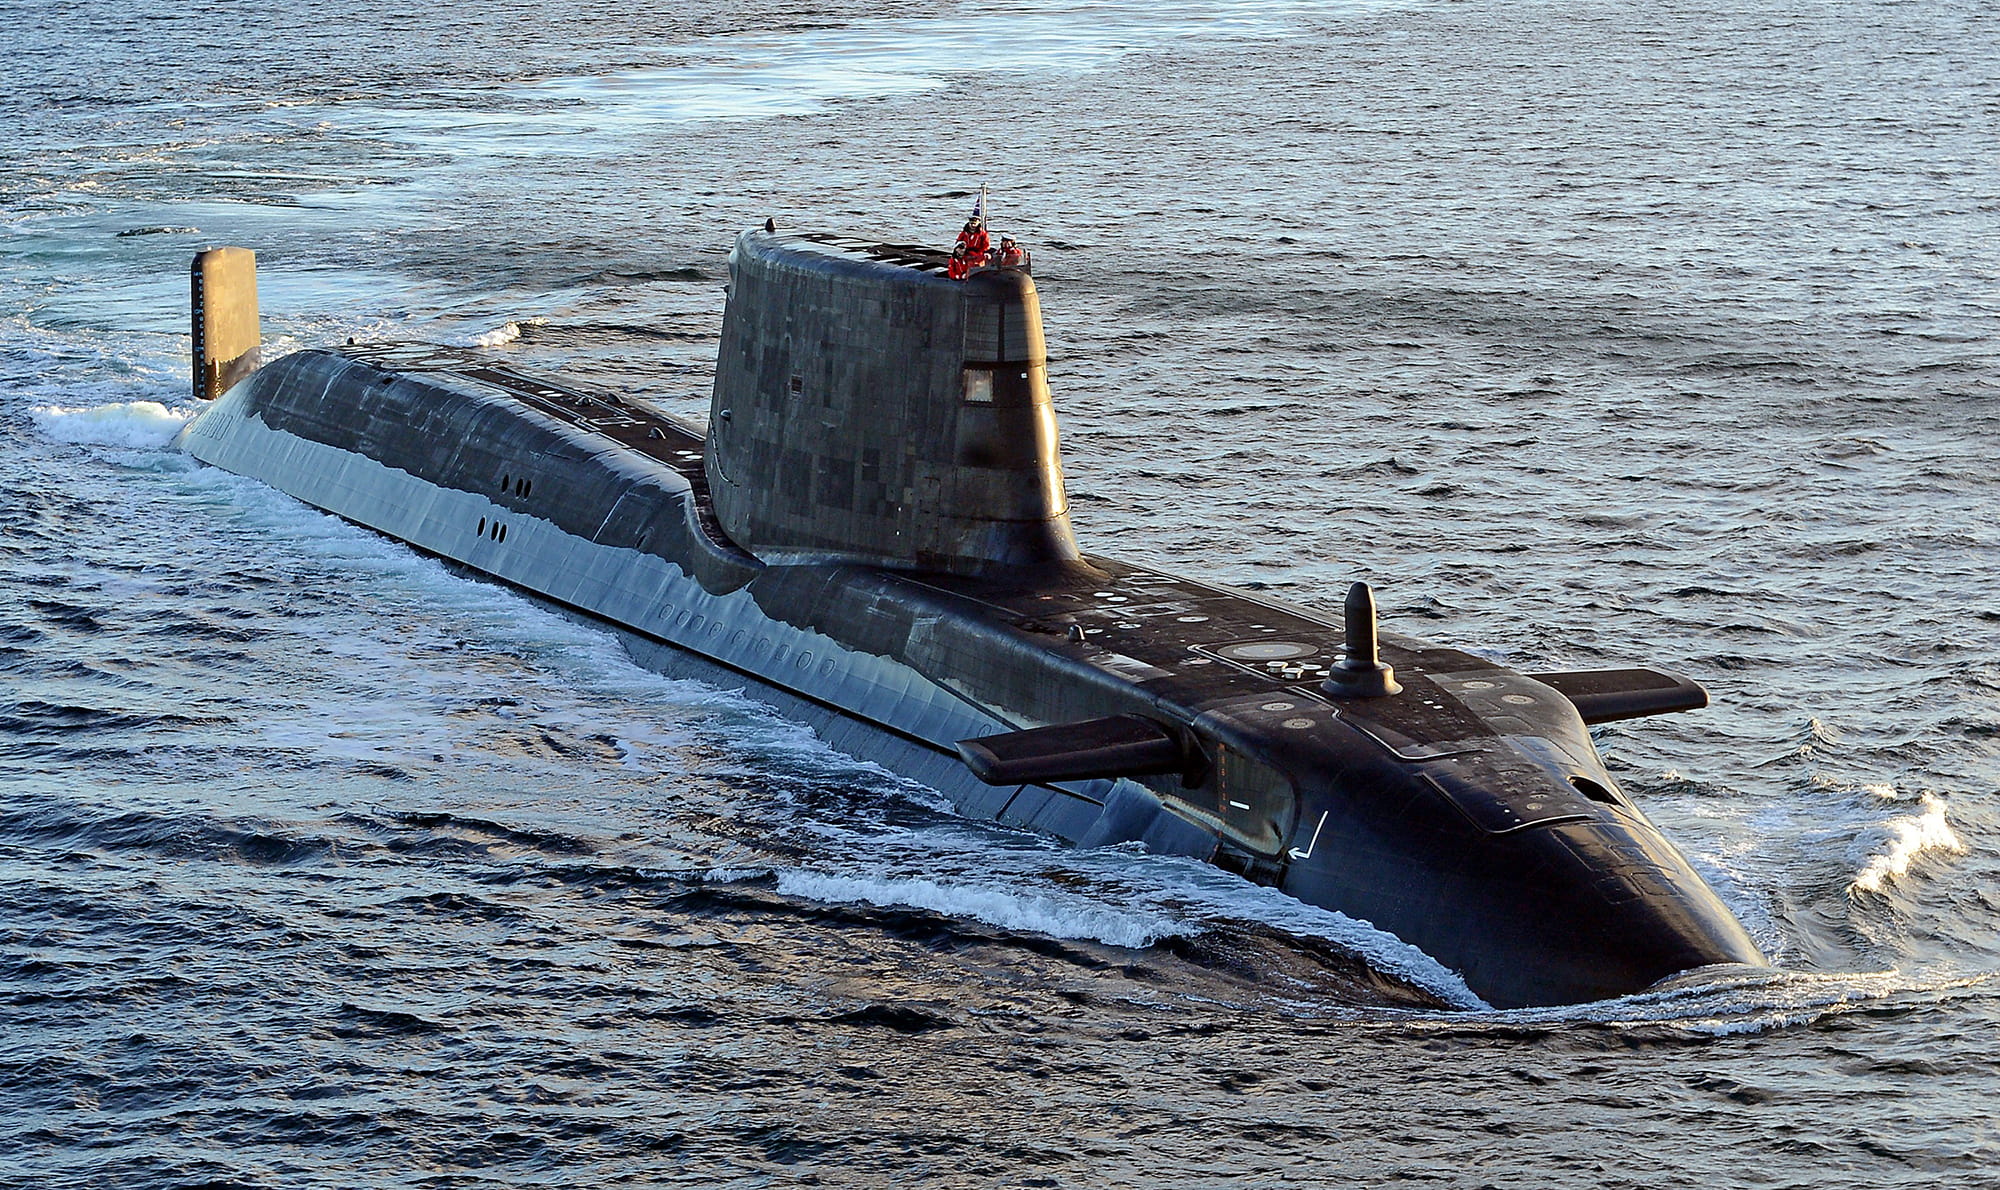 HMS Astute submarine surfaced surrounded by water